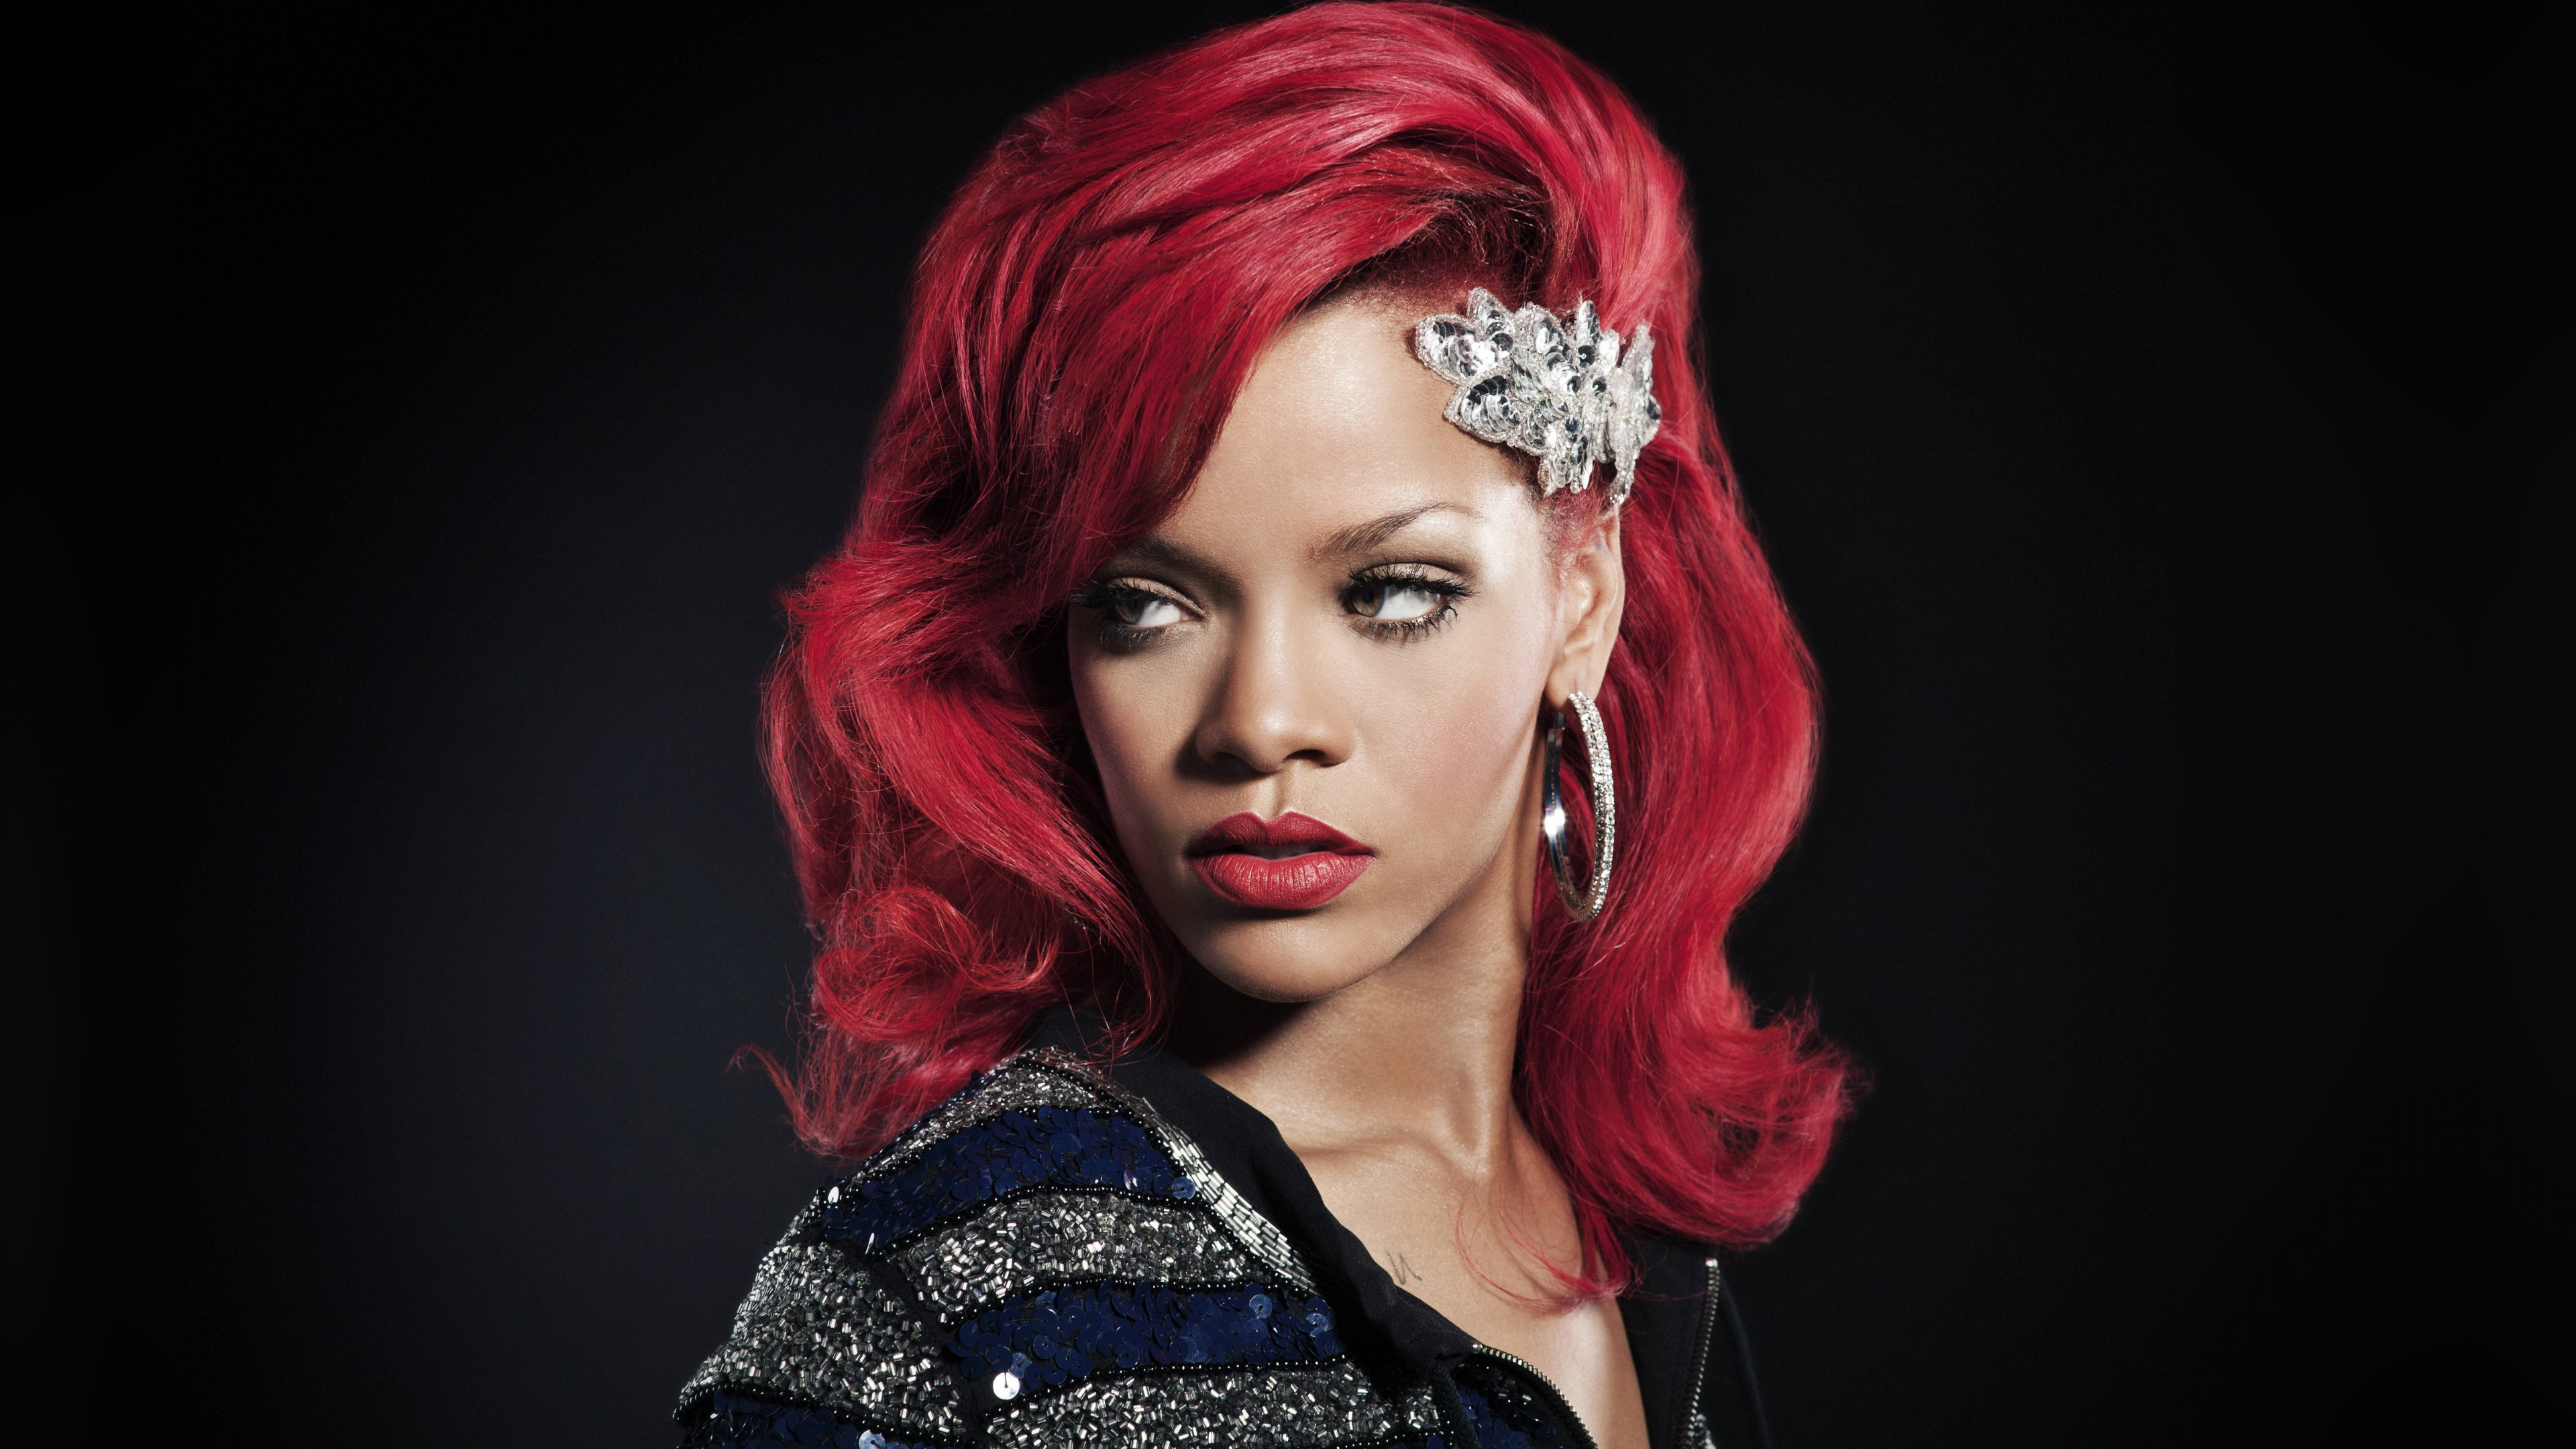 Download 3840x2160 wallpaper rihanna, colored hair, red, 4k, uhd 16: widescreen, 3840x2160 HD image, background, 14959